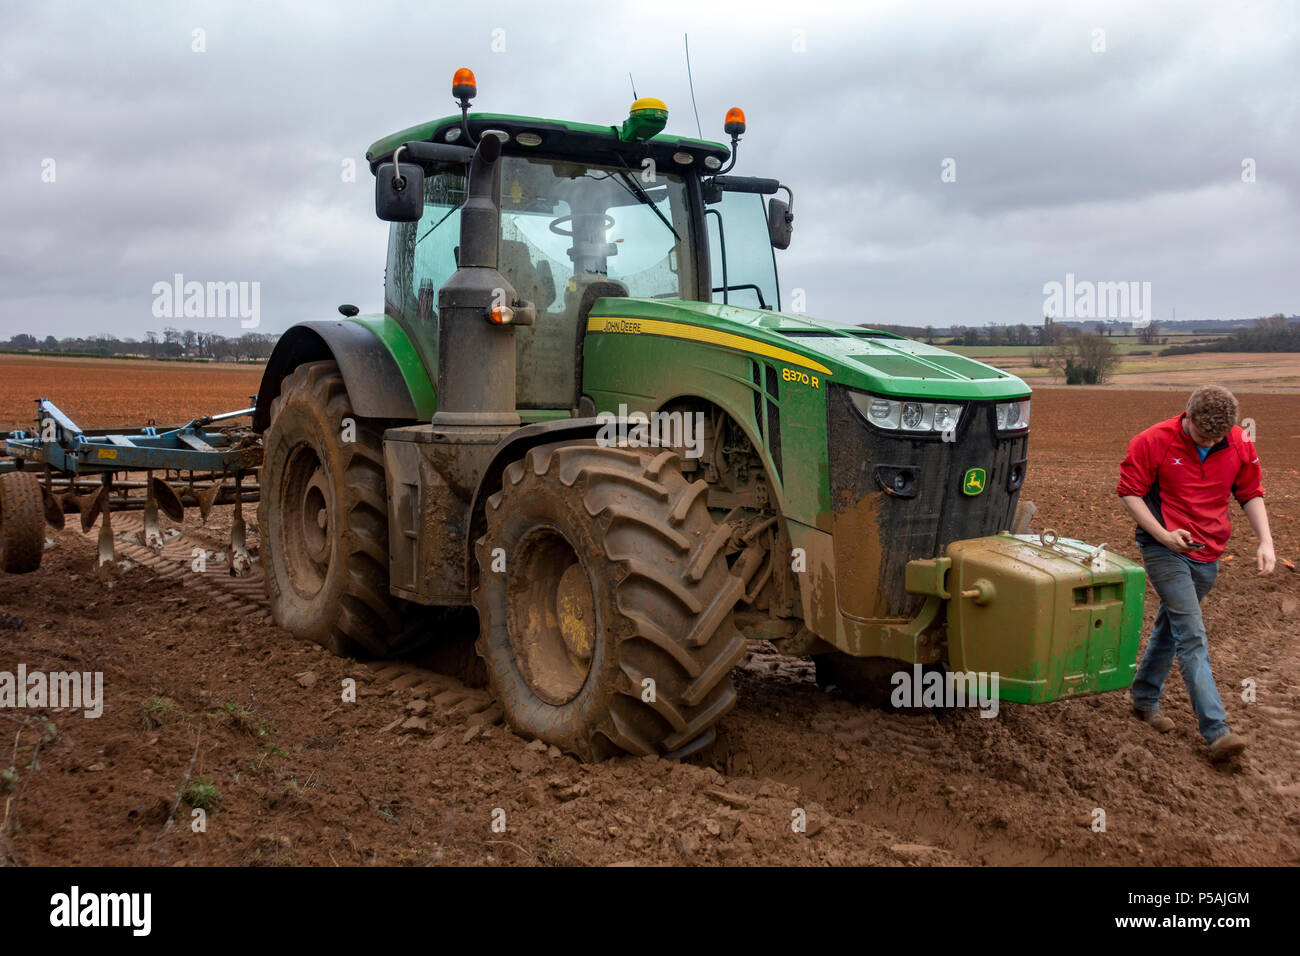 Tractor driver looking at the weather forecast on a smart phone Stock Photo